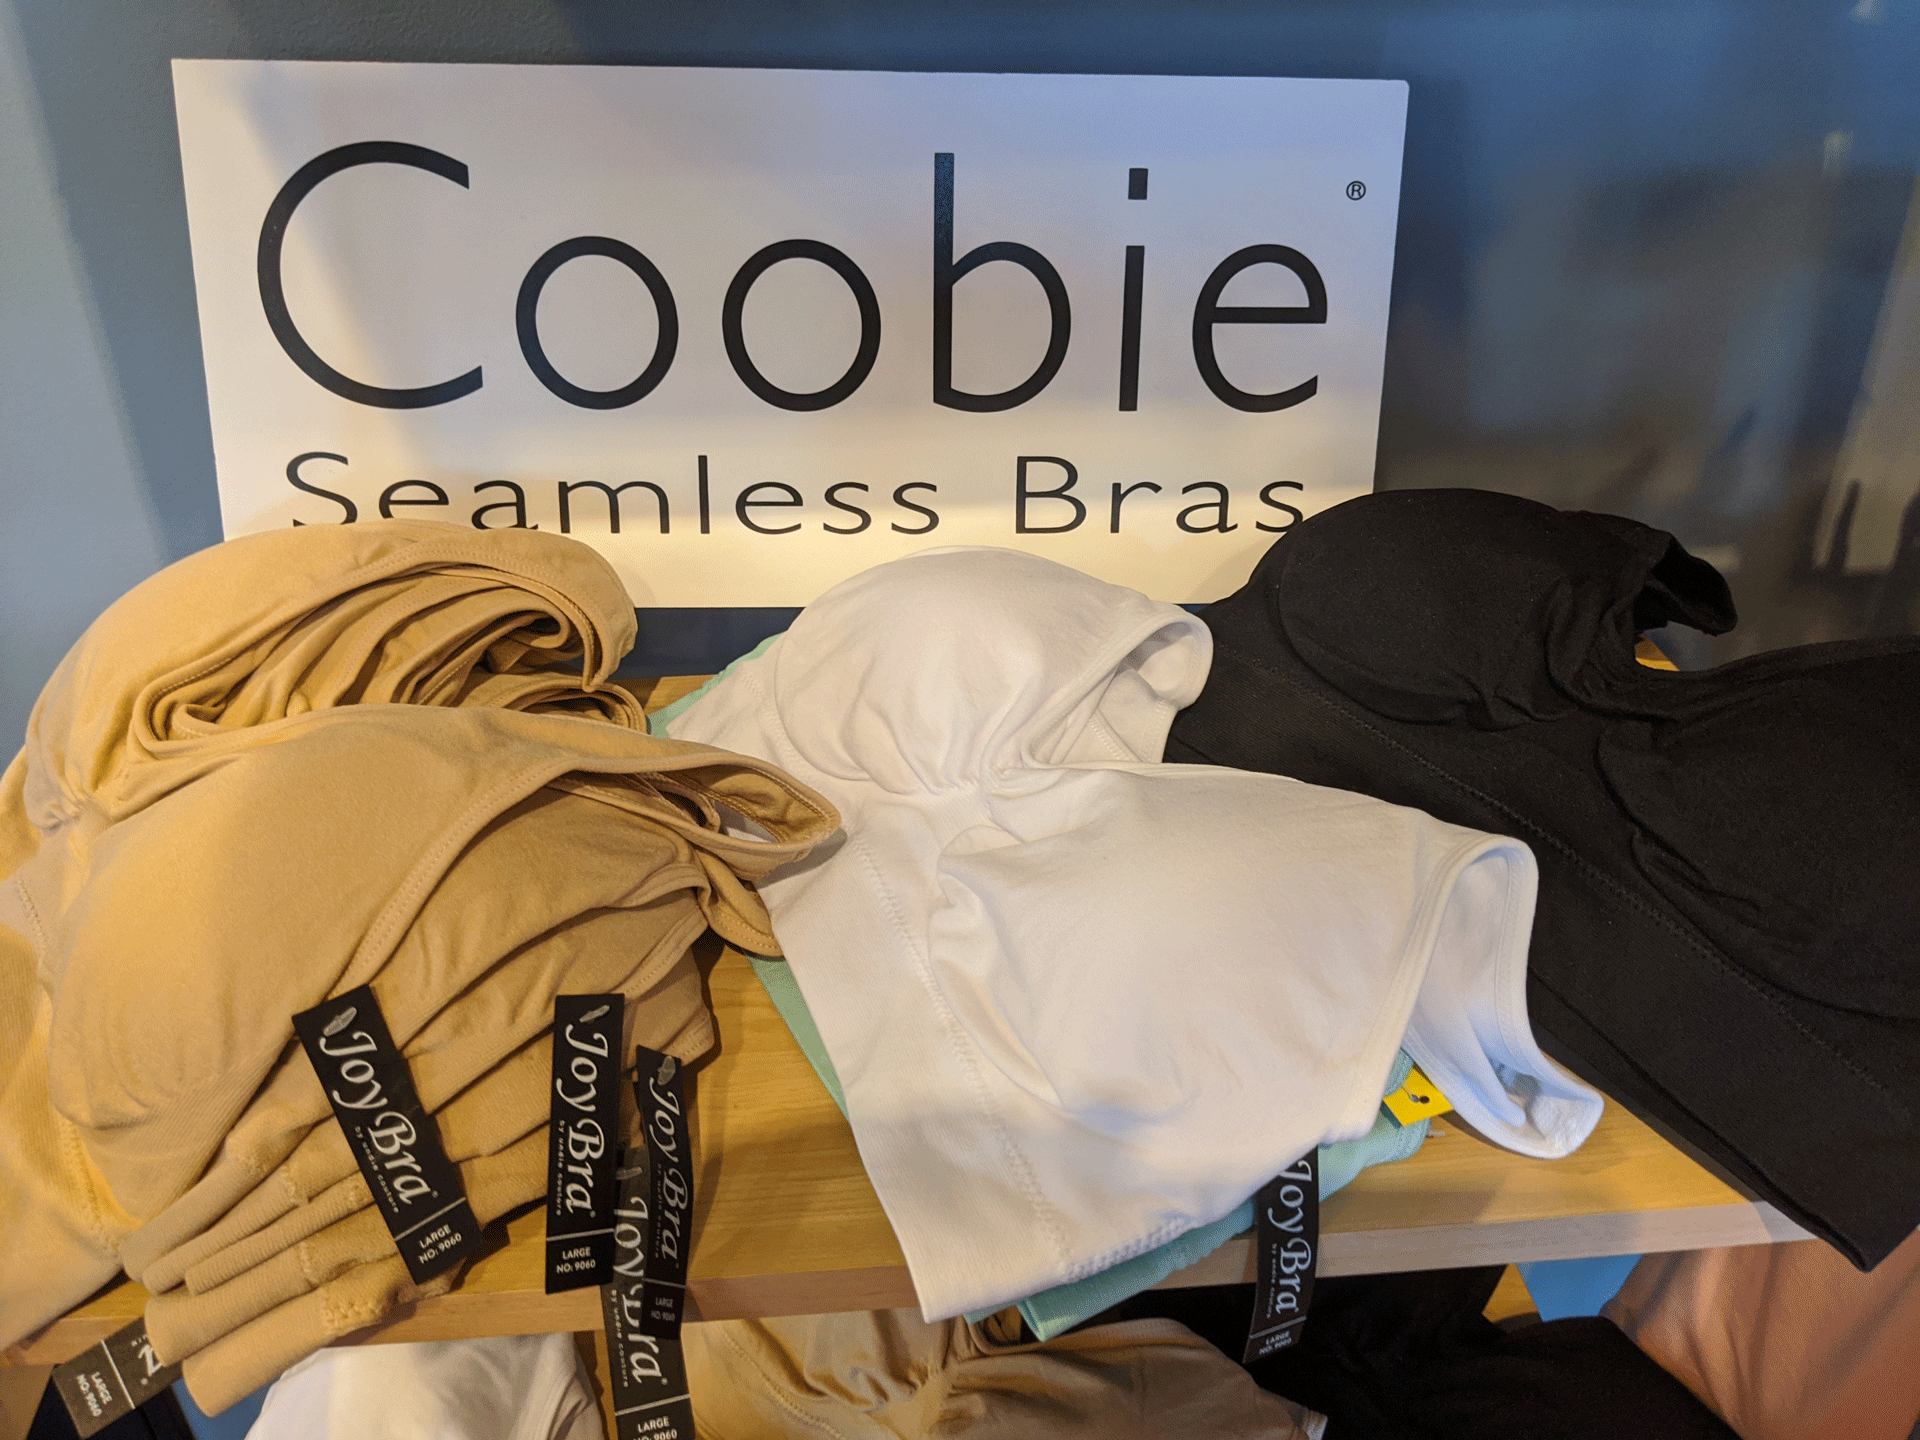 Coobie Seamless Bras - 7 SIGNS YOU'RE WEARING THE WRONG SPORTS BRA🧐  1️⃣Your sports bra feels loose. 2️⃣Your boobs bounce a lot during exercise.  3️⃣The straps dig into your shoulders. 4️⃣You're wearing